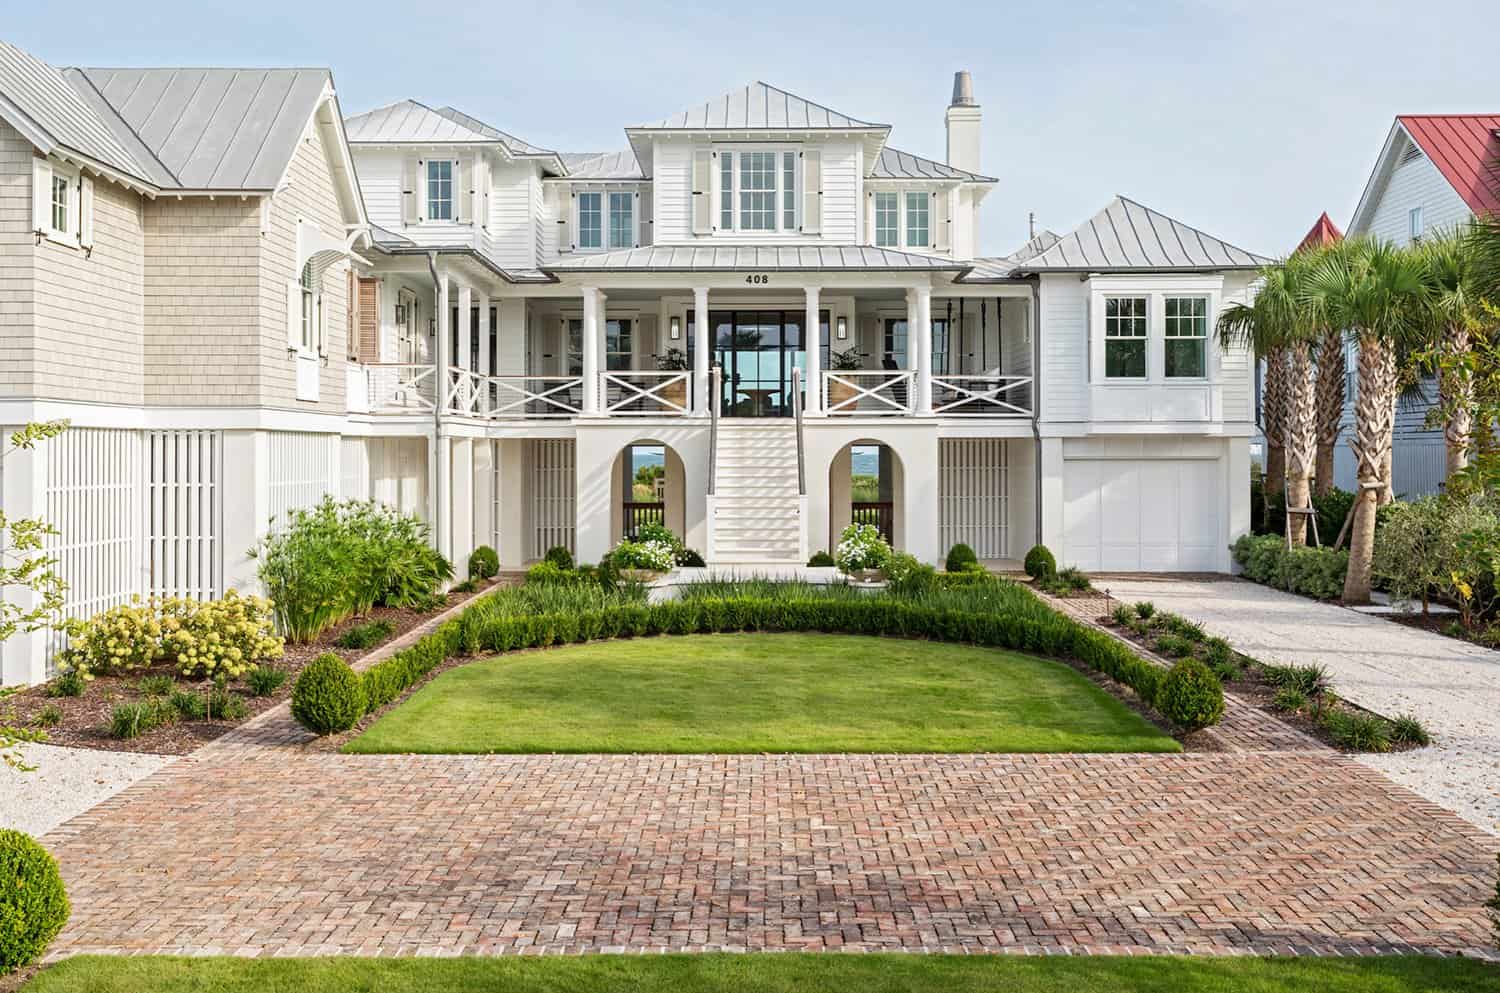 lowcountry-modern-beach-style-home-exterior